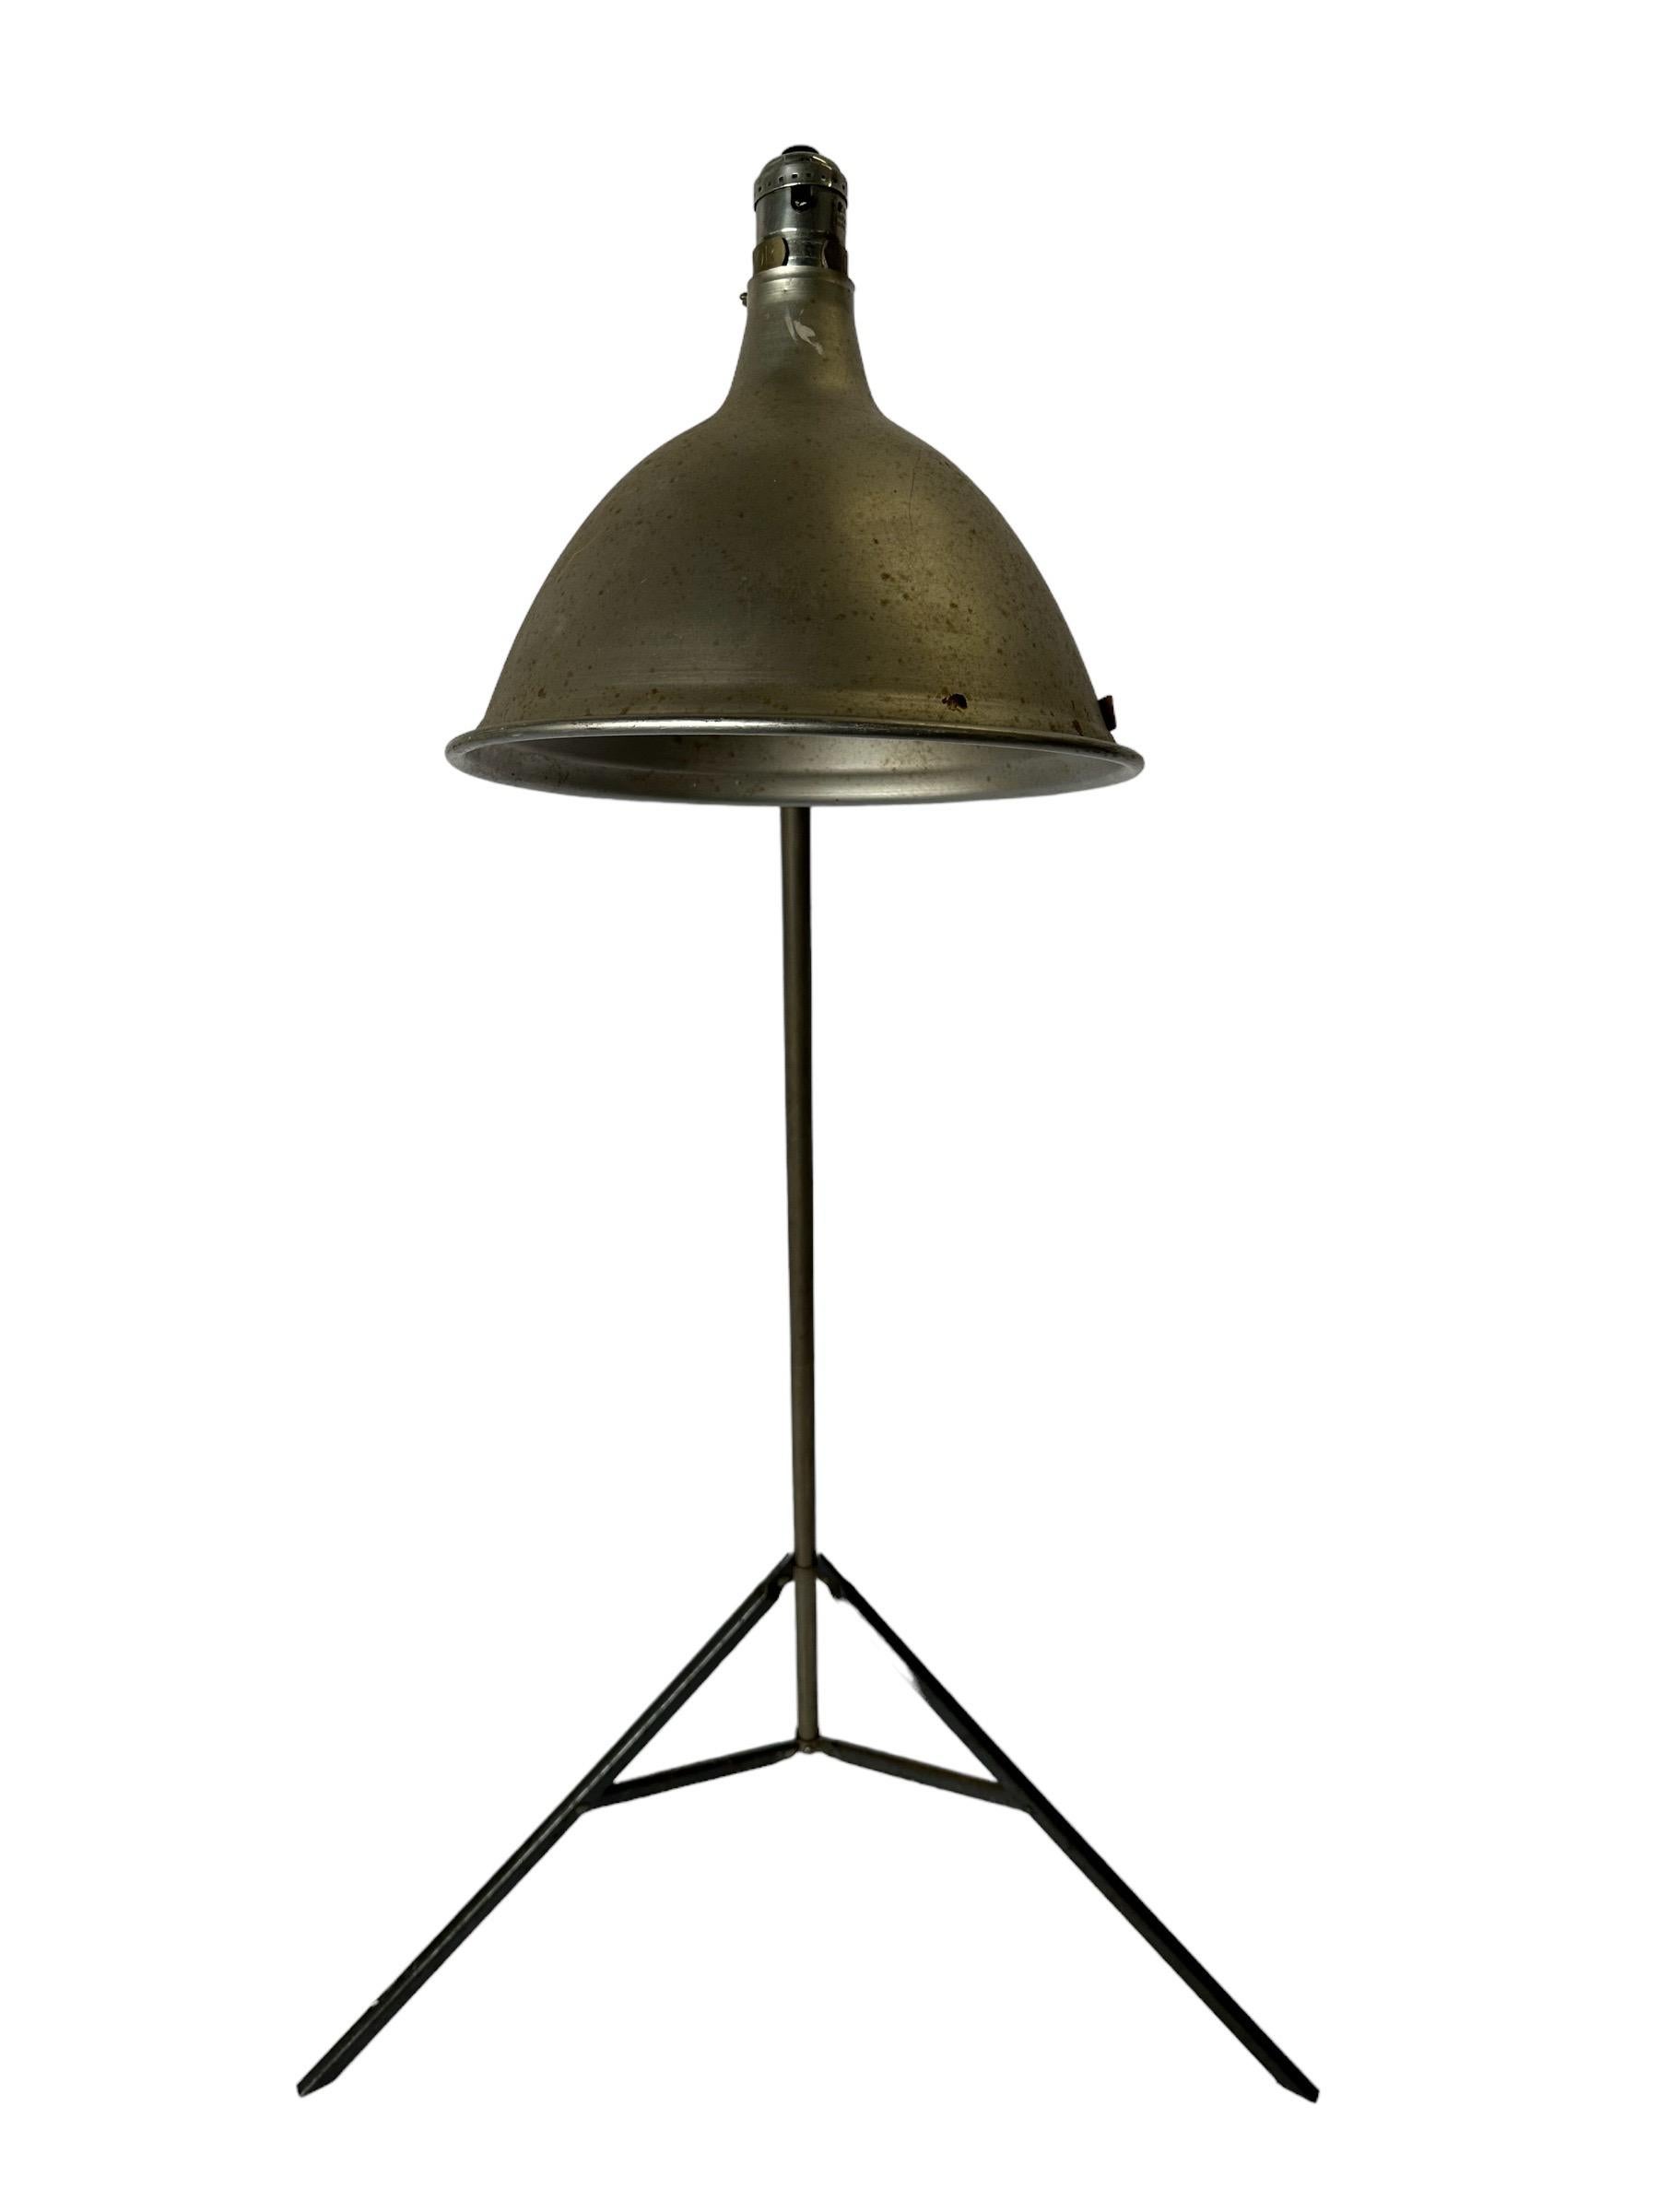 Industrial chic metal tripod floor lamp. Adjustable height and adjustable pivoting shade. Signed with Smith Victor manufacturer’s tag. Perfect for modern living with a nod to the past.